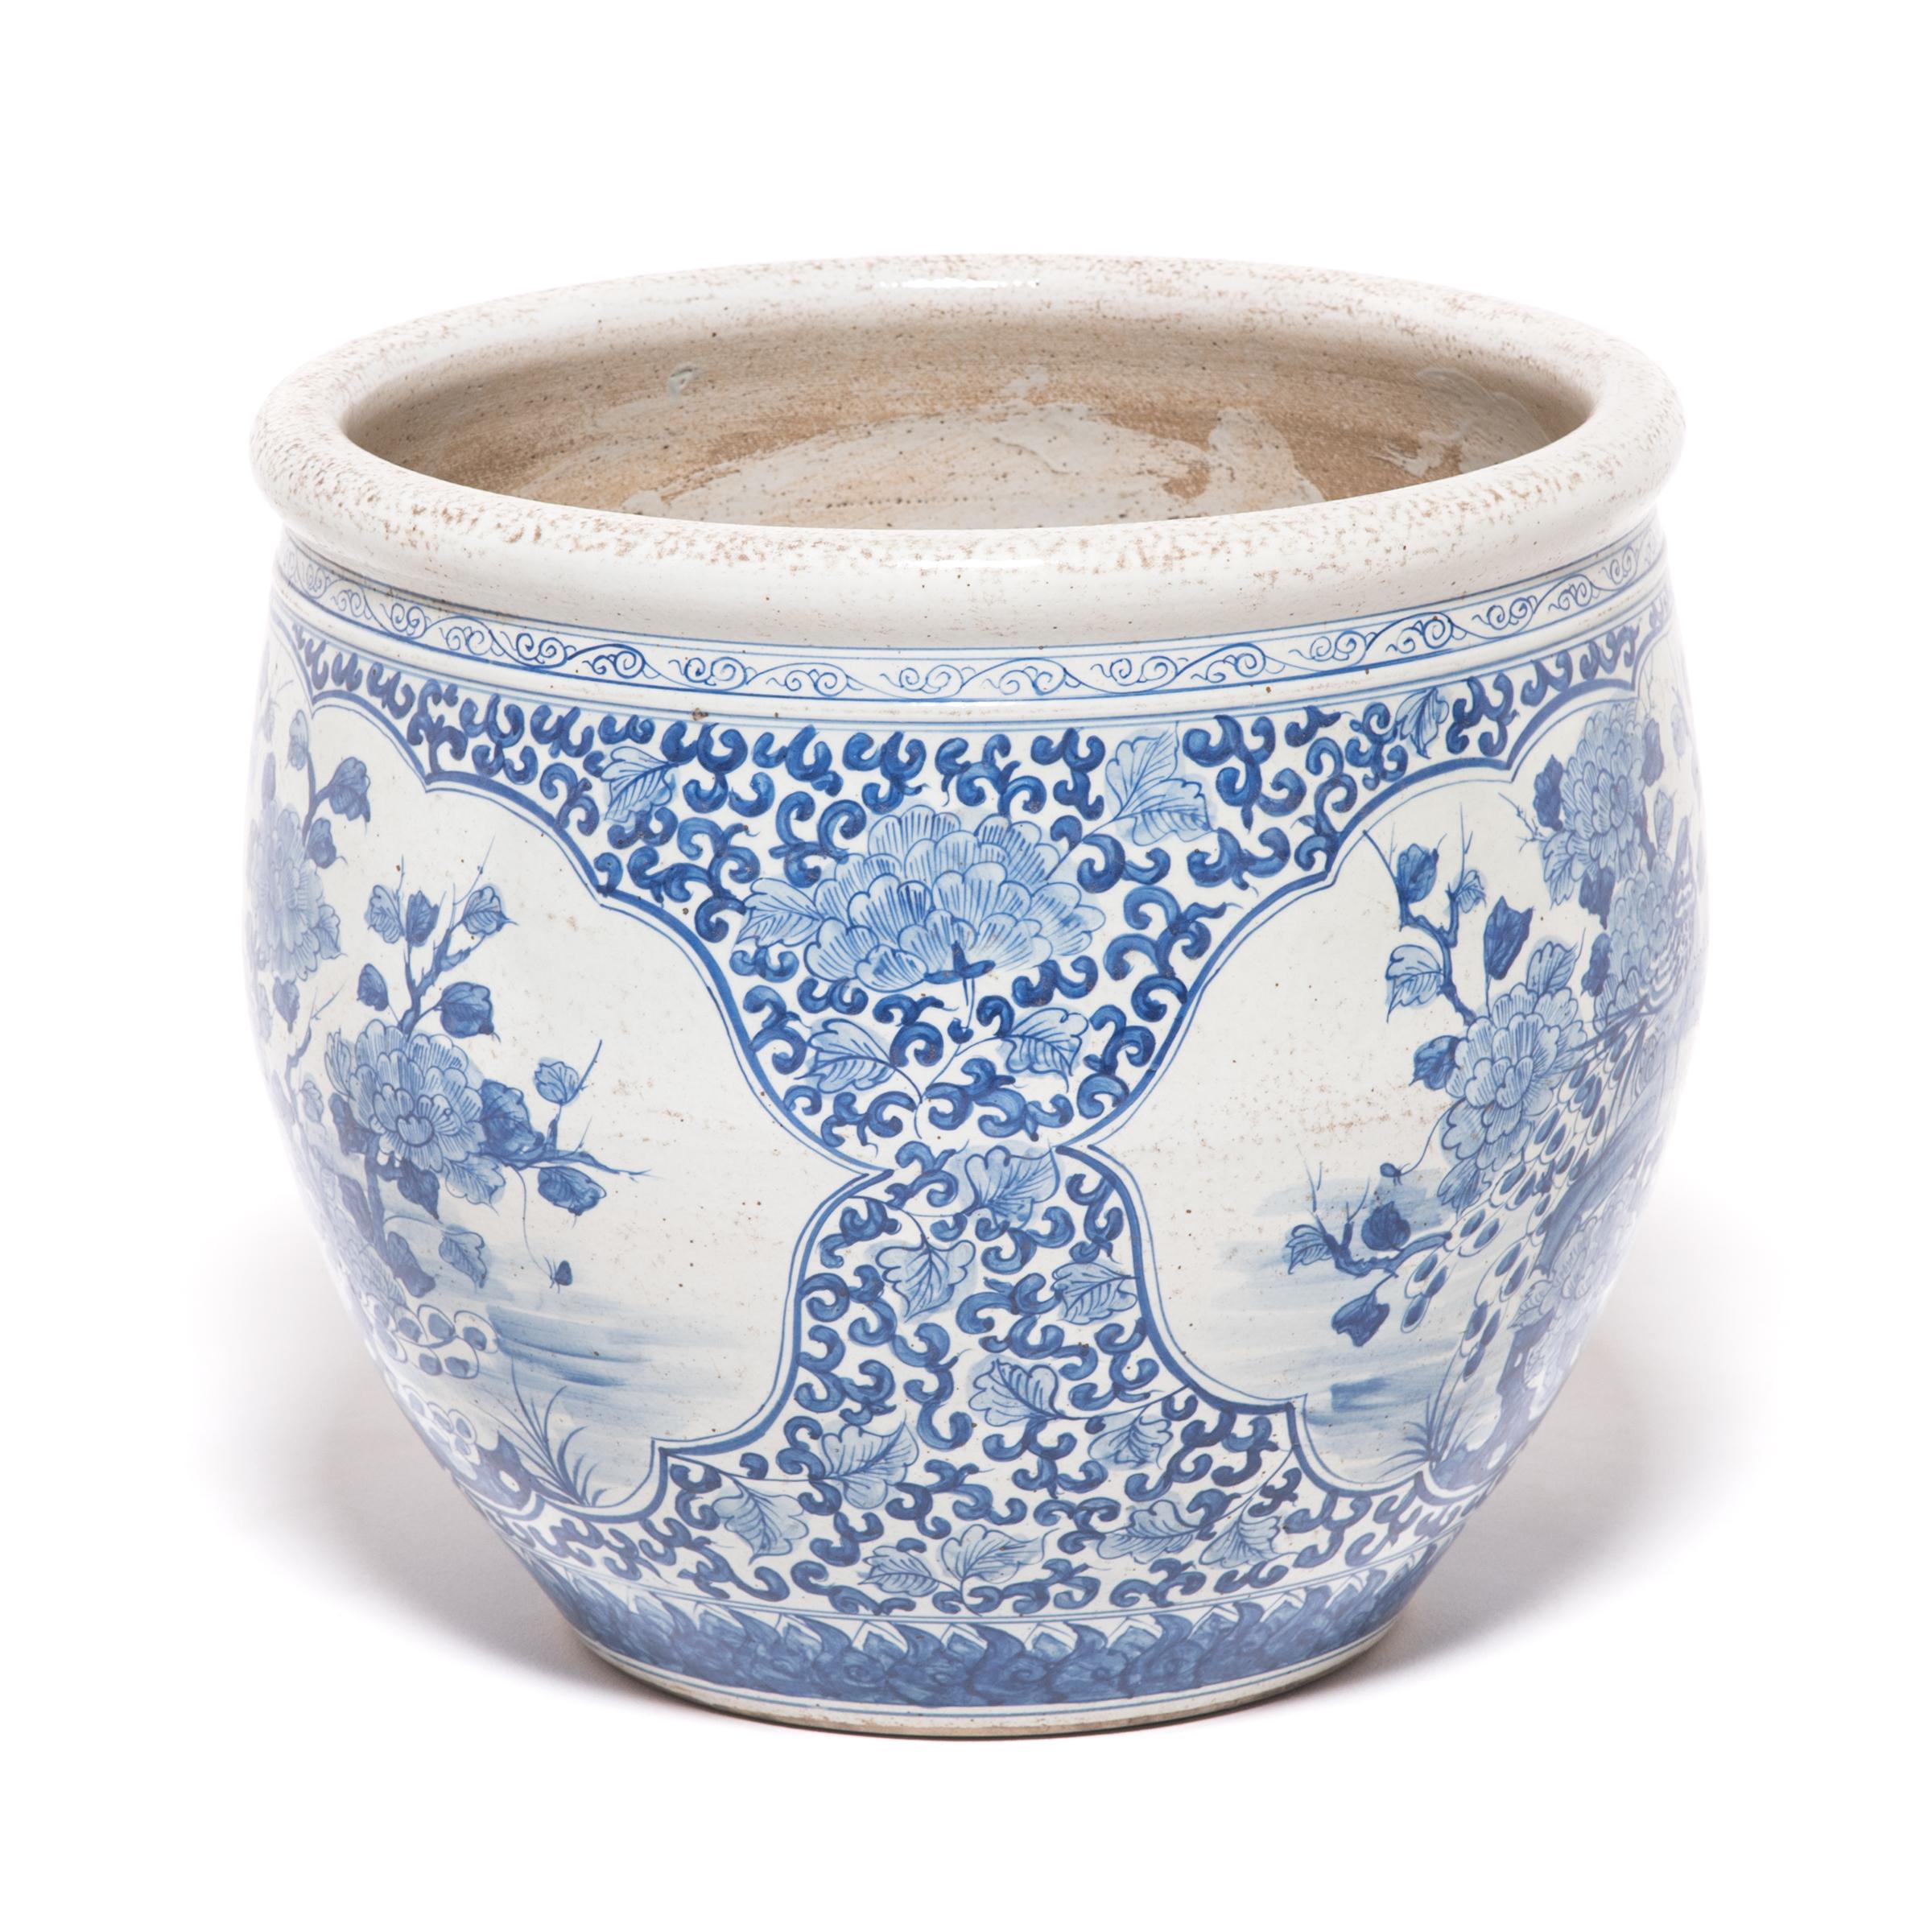 A suitable wedding gift, this blue-and-white bowl is hand painted with magpies, symbols of good fortune and talismans of marital happiness when depicted as a pair. Two cartouches on either side of the bowl present the gregarious birds in an